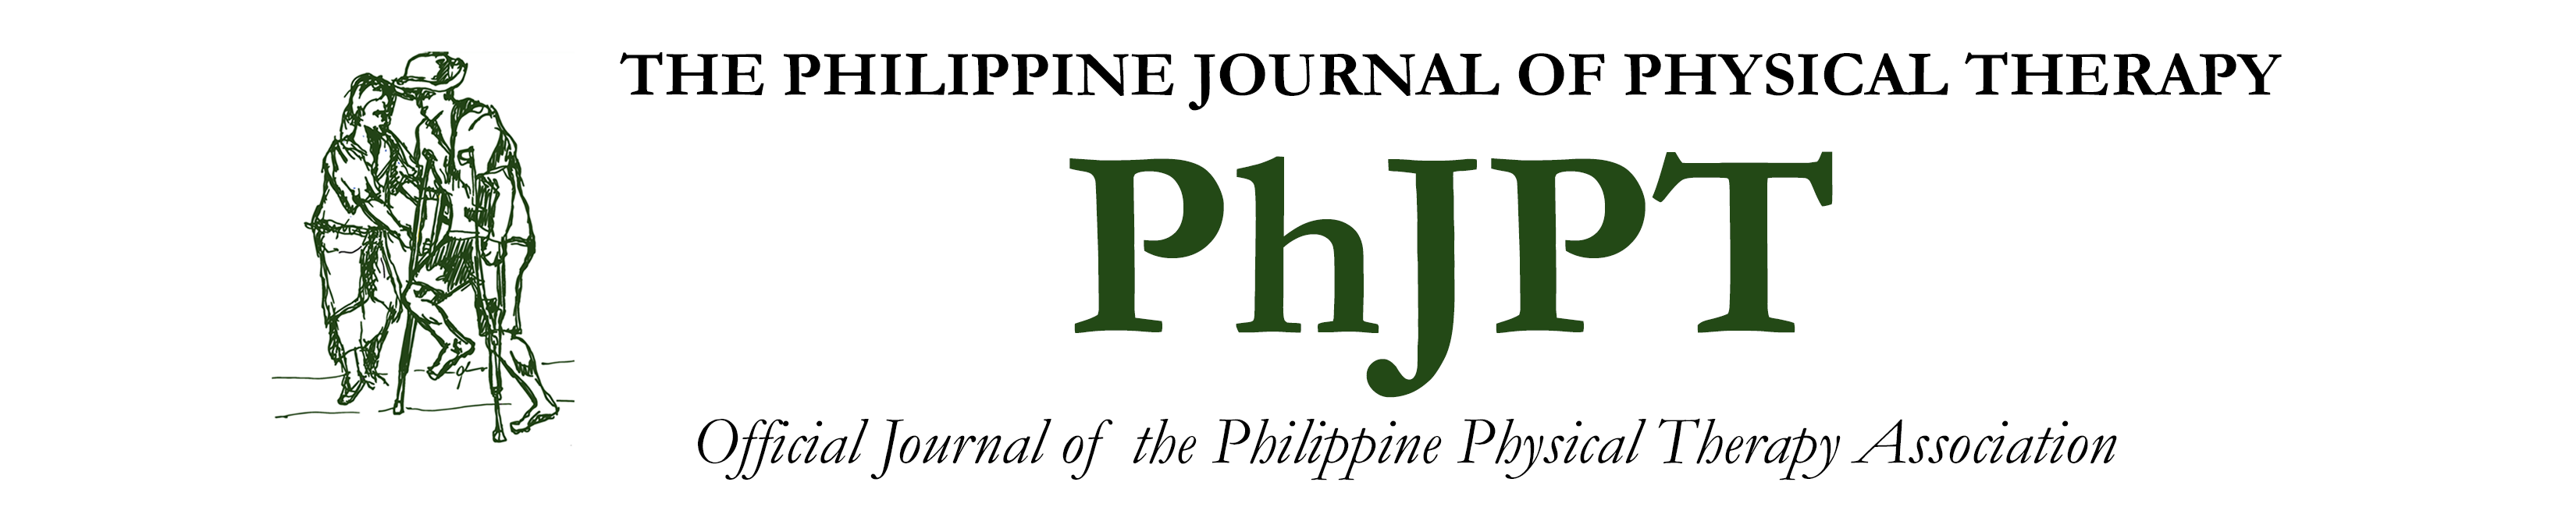 Philippine Journal of Physical Therapy